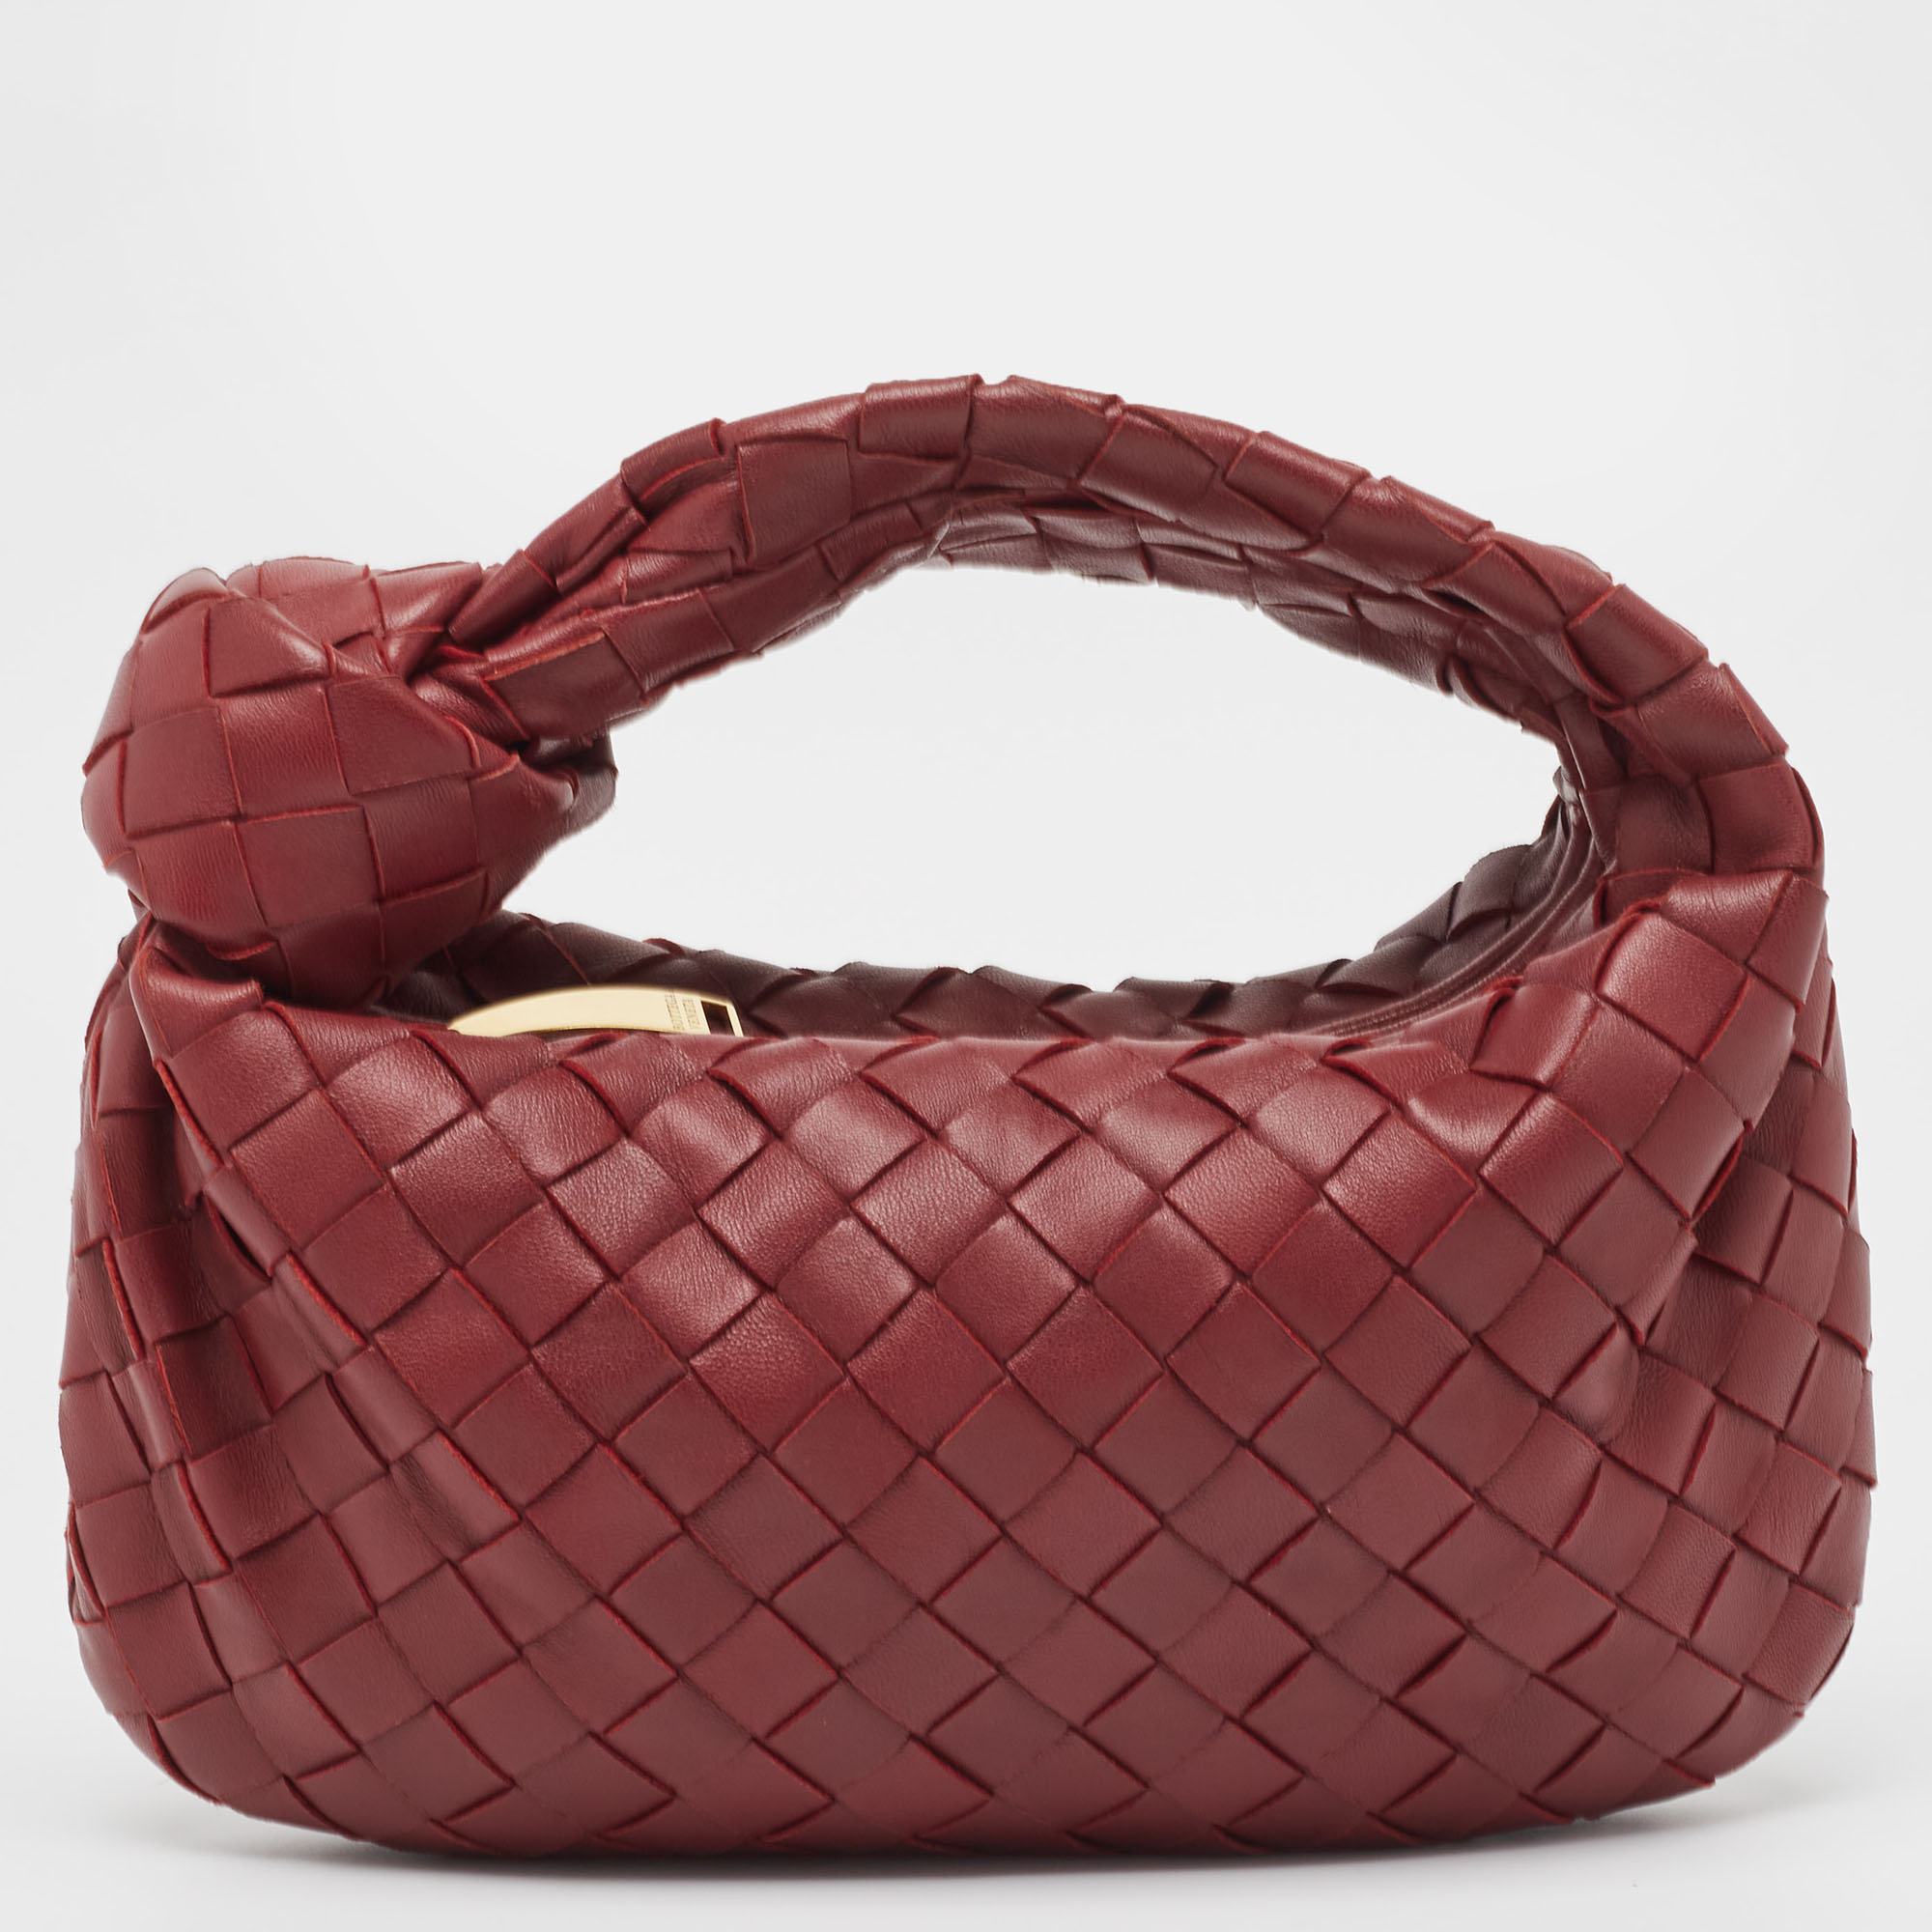 This Bottega Veneta Jodie bag is crafted from leather using their signature Intrecciato weaving technique into a seamless silhouette. This mini bag personifying elegance and subtle charm is held by a knotted handle. The bag has an interior sized to hold your days essentials.